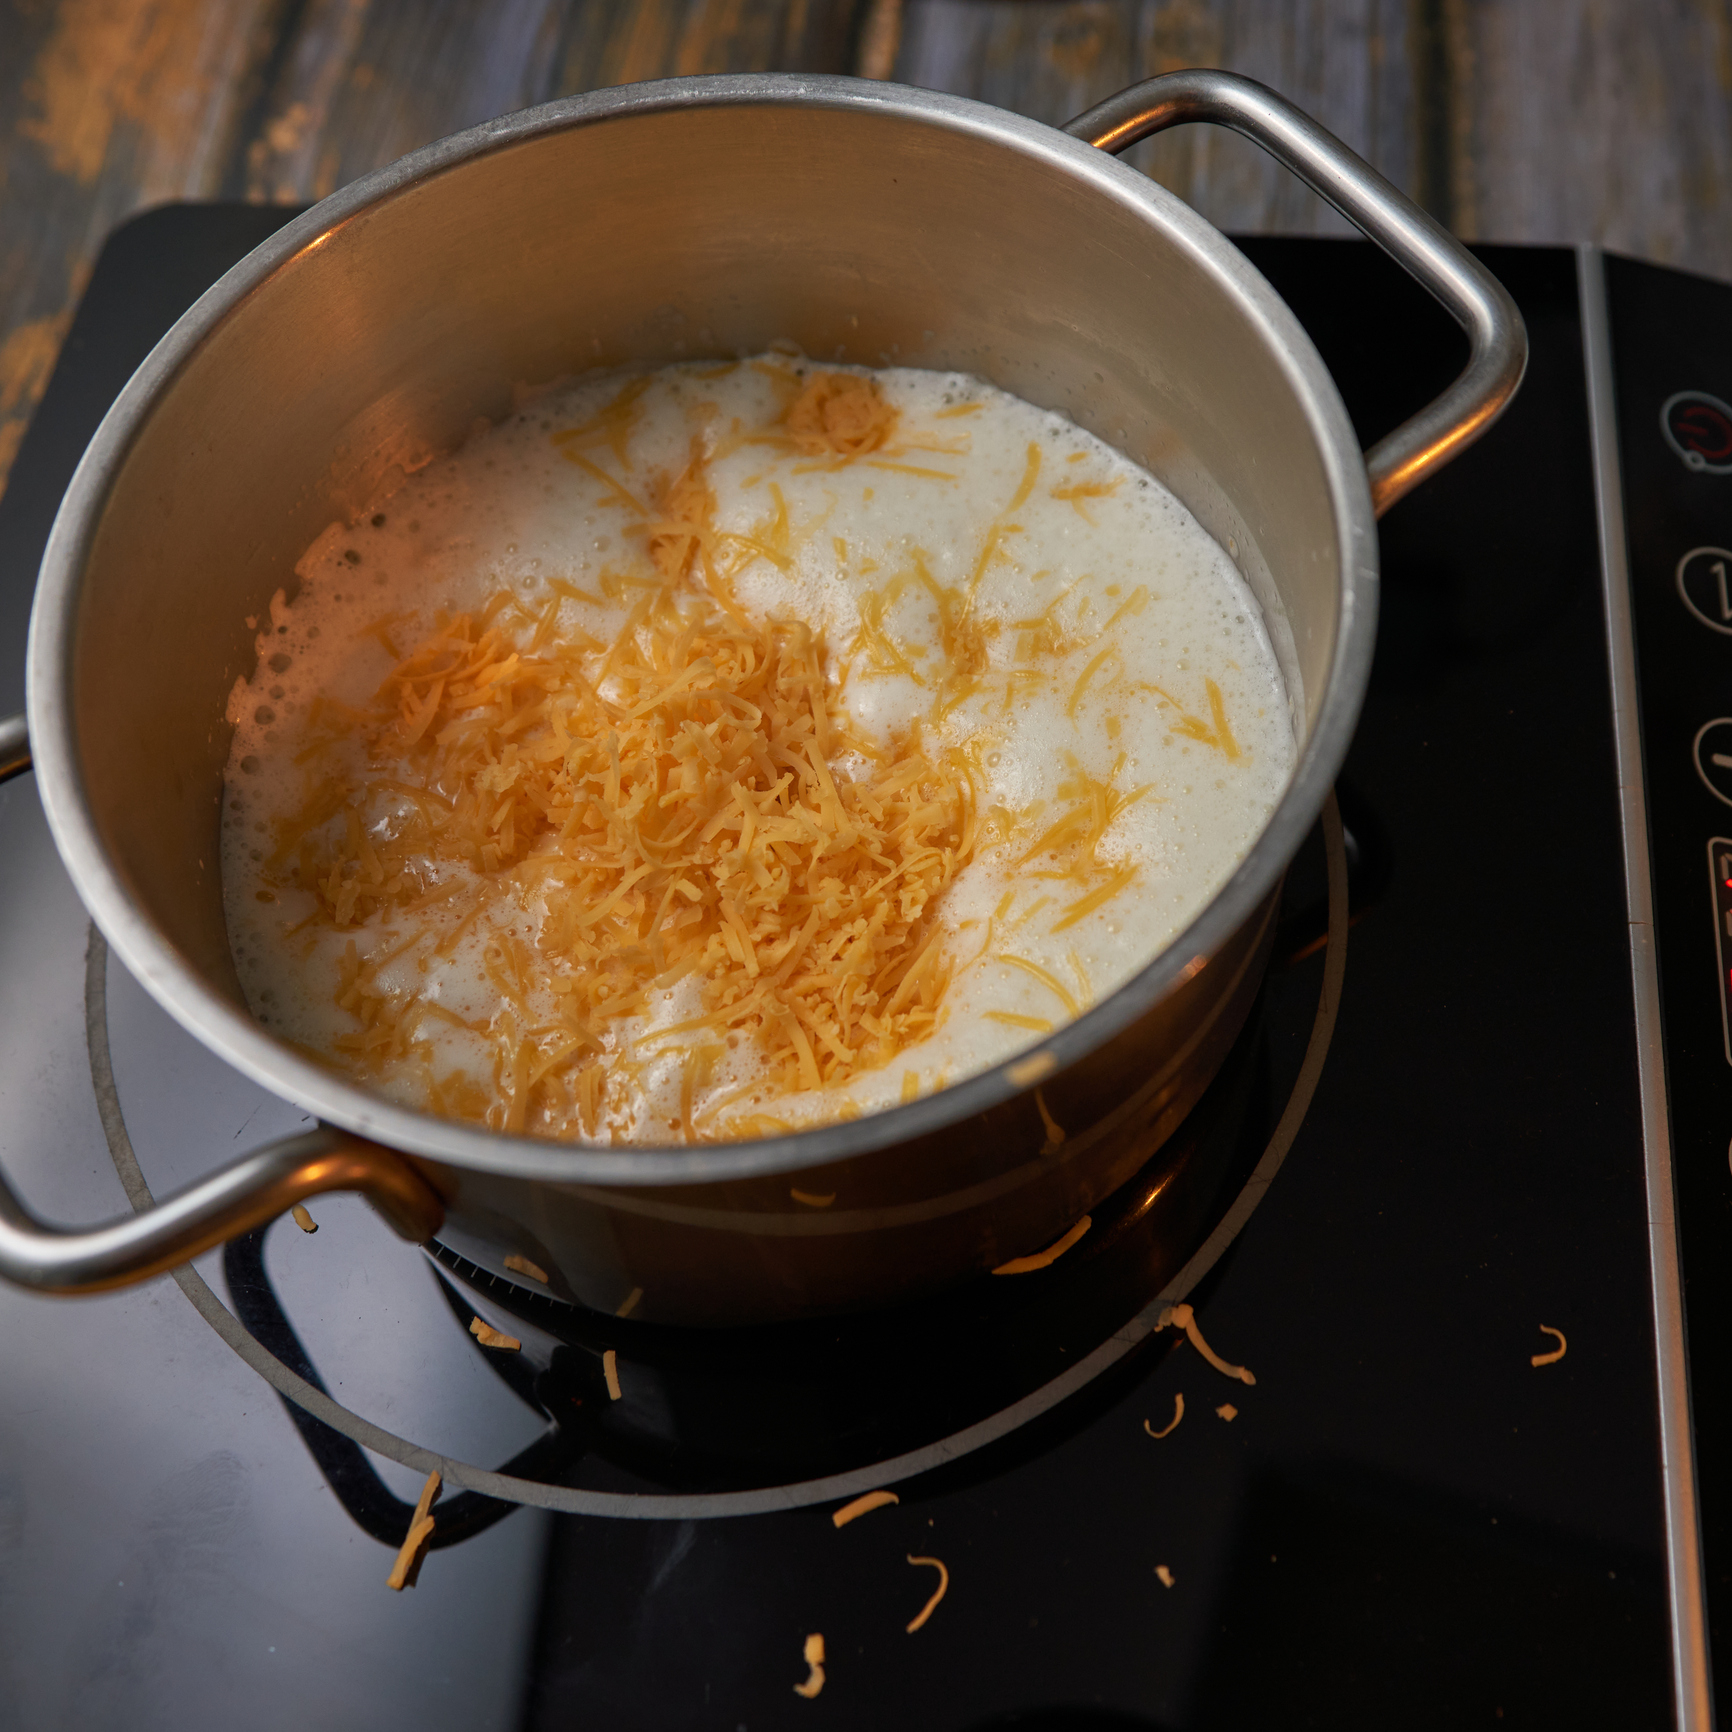 A pot on a stove with melting shredded cheese in a white liquid